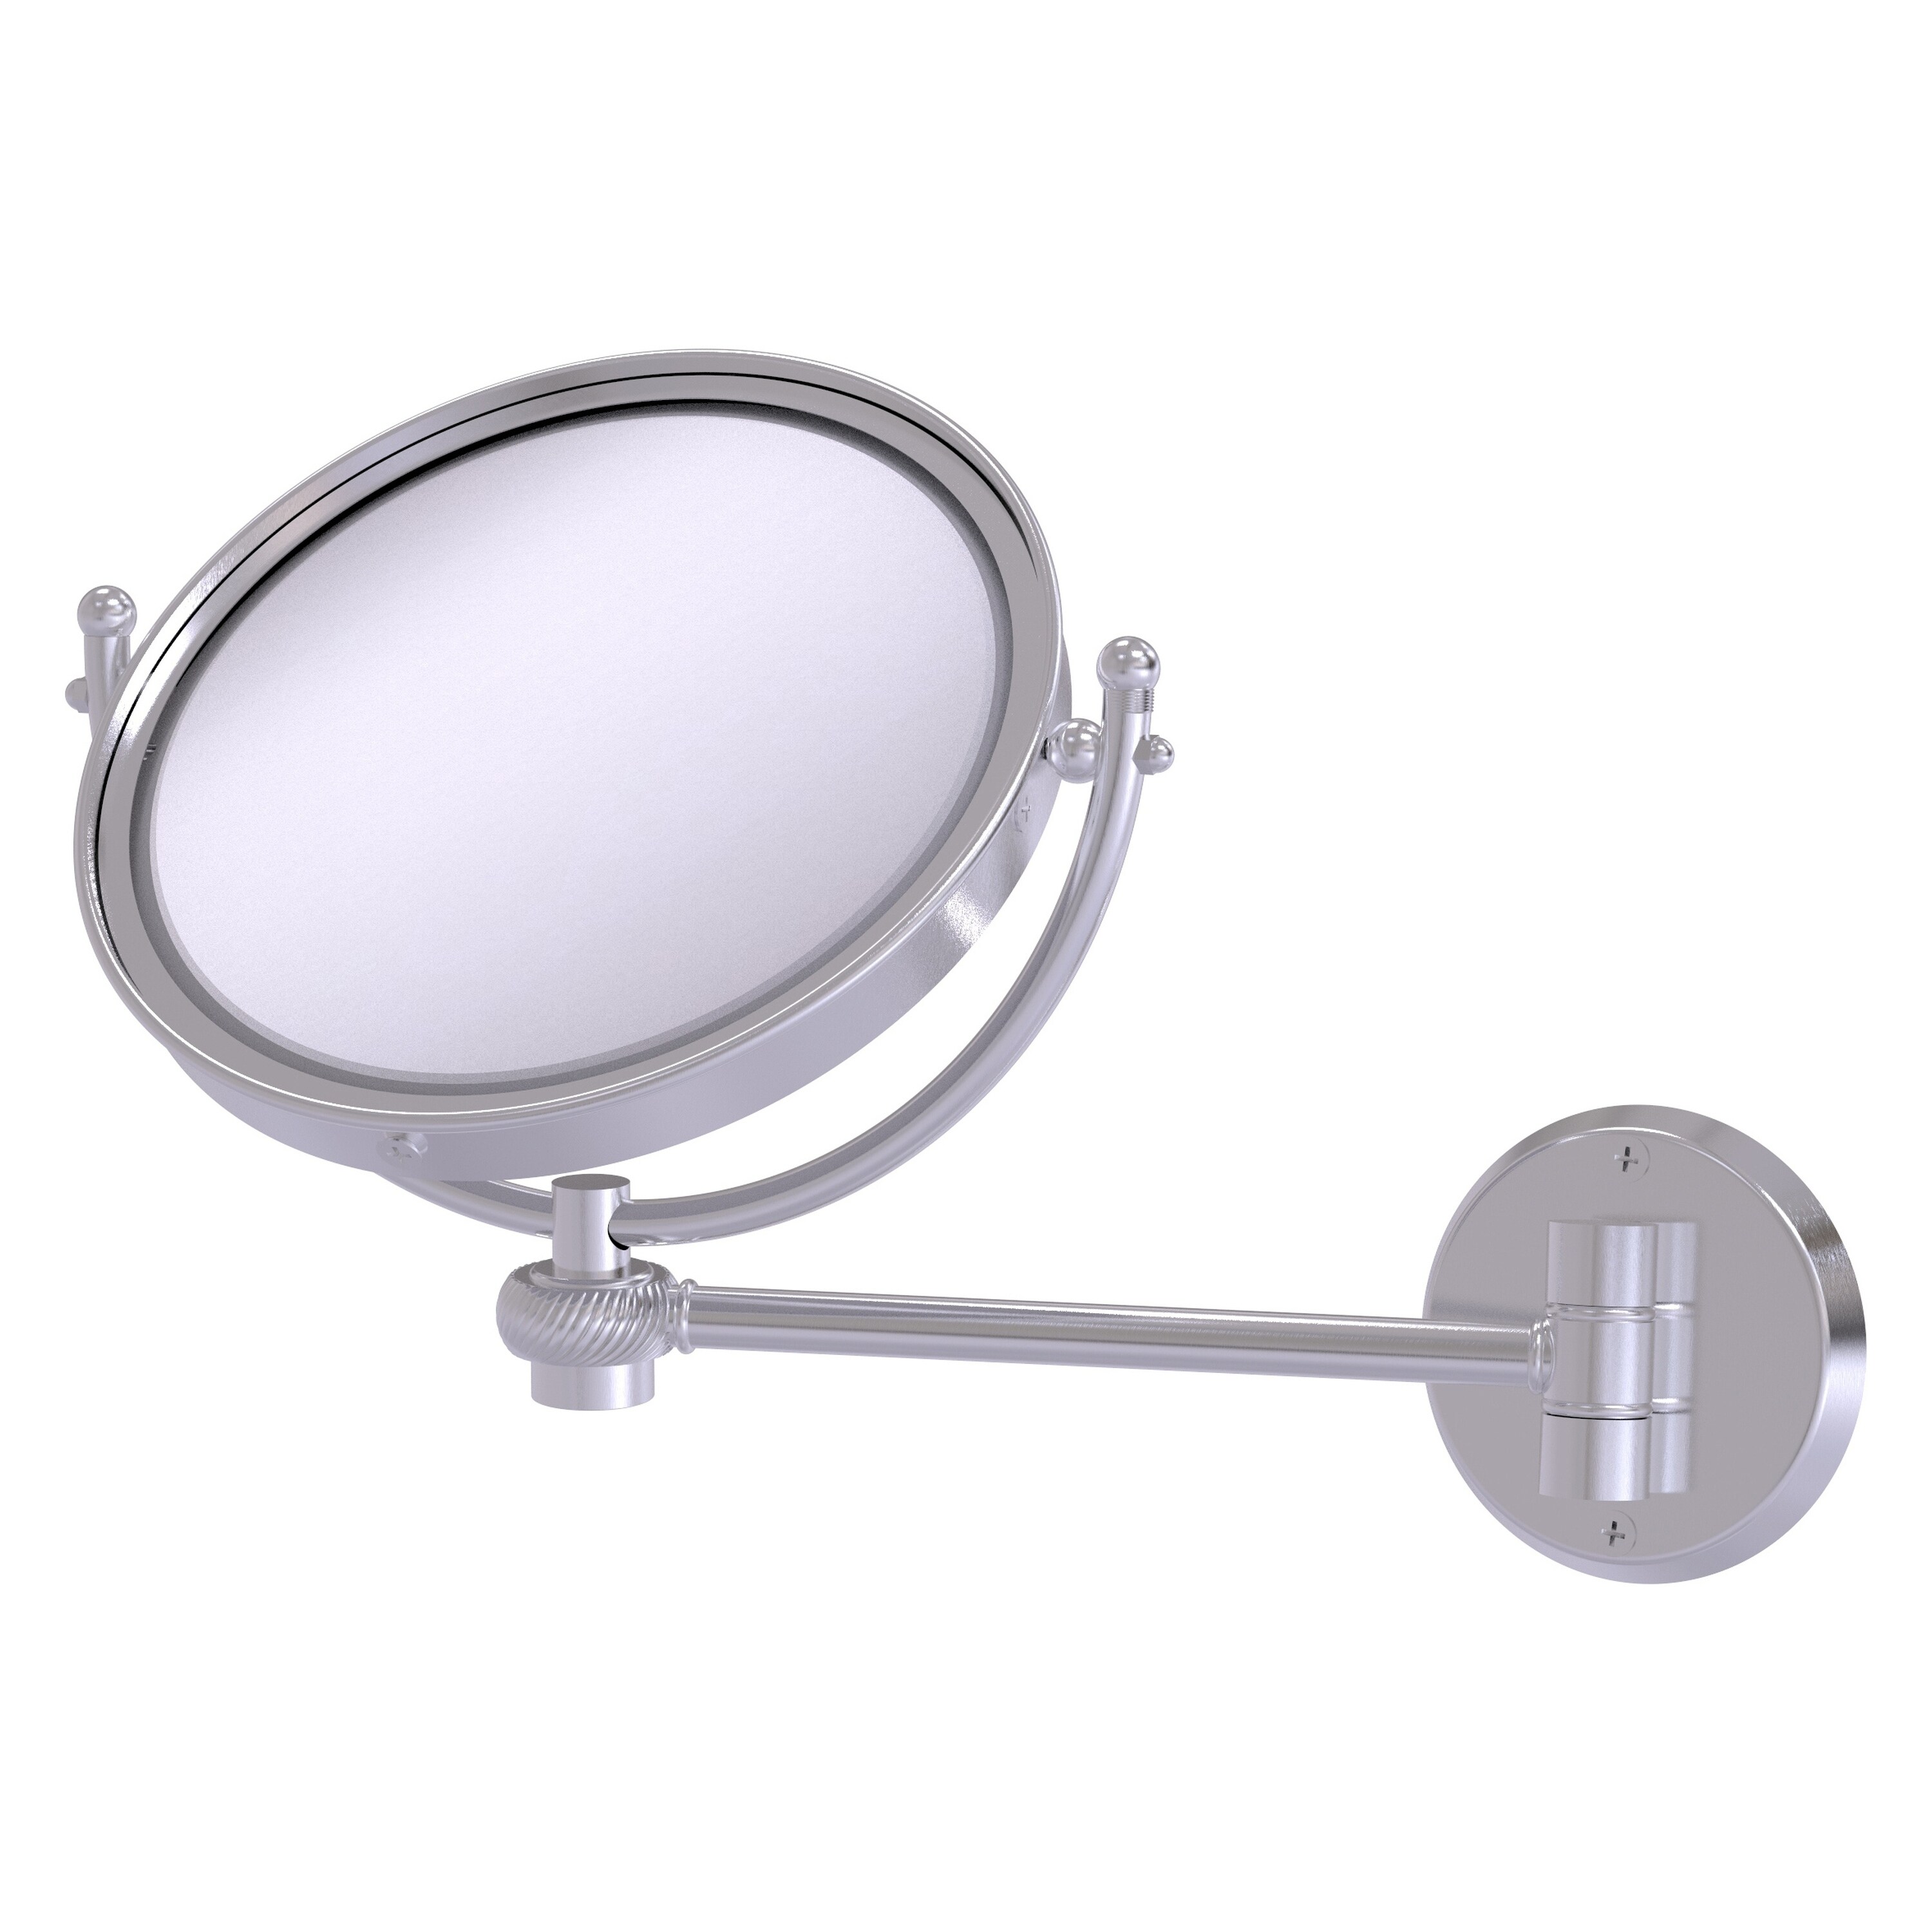 8-in x 10-in Satin Chrome Double-sided 5X Magnifying Wall-mounted Vanity Mirror | - Allied Brass WM-5T/5X-SCH